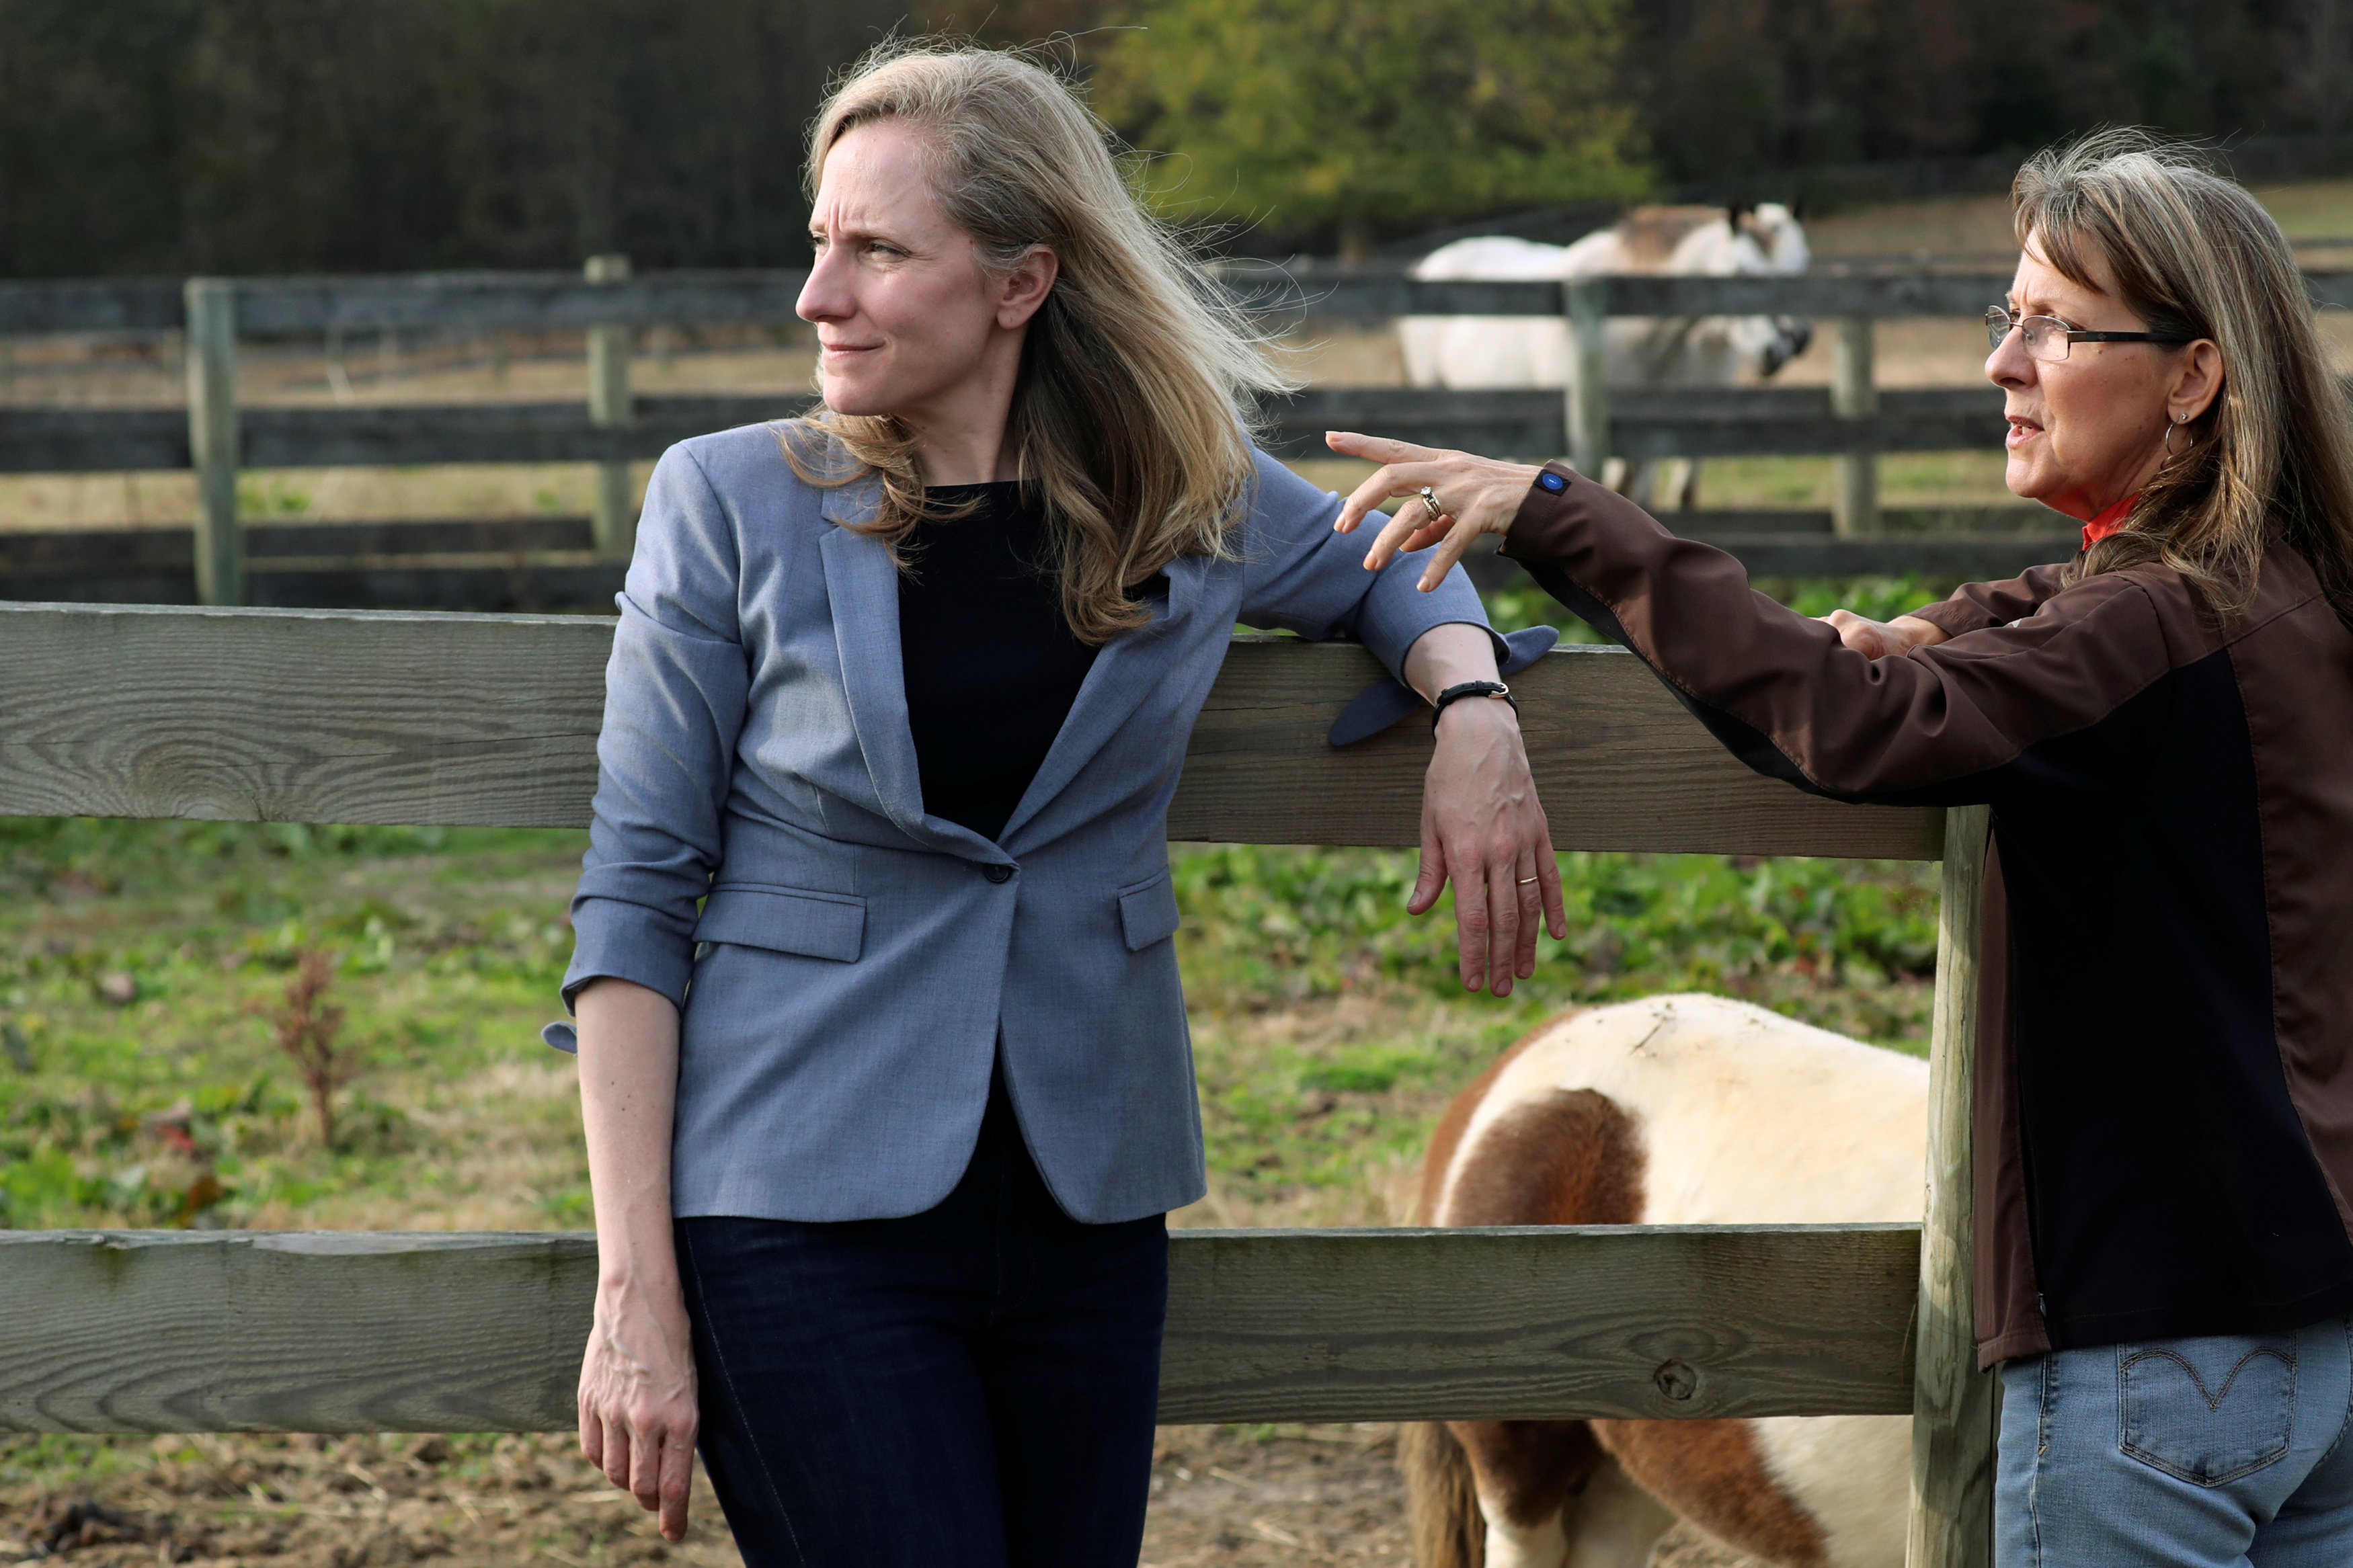 Virginia Democratic candidate for U.S. Representative Abigail Spanberger (L) talks with Jorg Huckabee-Mayfield during a visit to the horse rescue stables she and her husband operate in Burkeville, Virginia, U.S. October 31, 2018. REUTERS/Jonathan Ernst